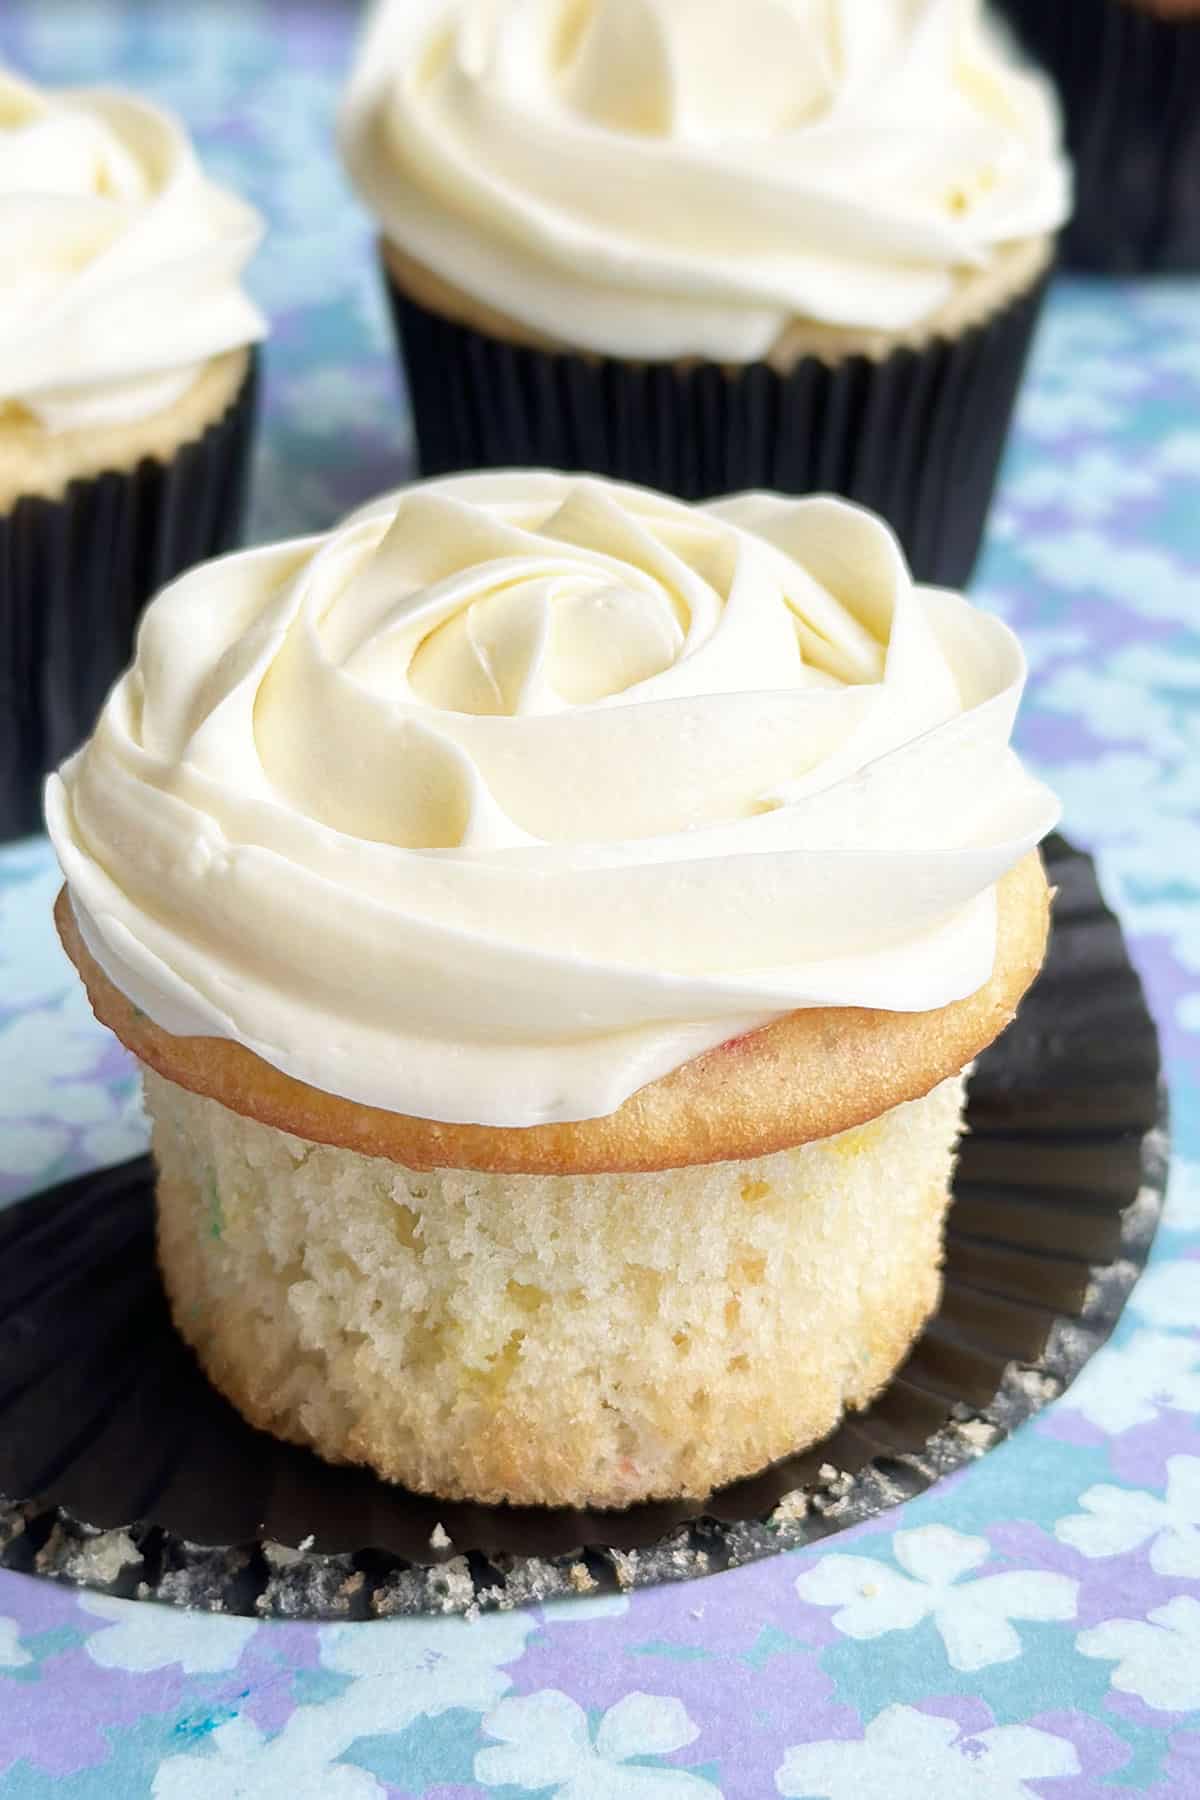 Easy Almond Cupcakes With Almond Buttercream Frosting on Blue Pattern Background- Liner Removed.